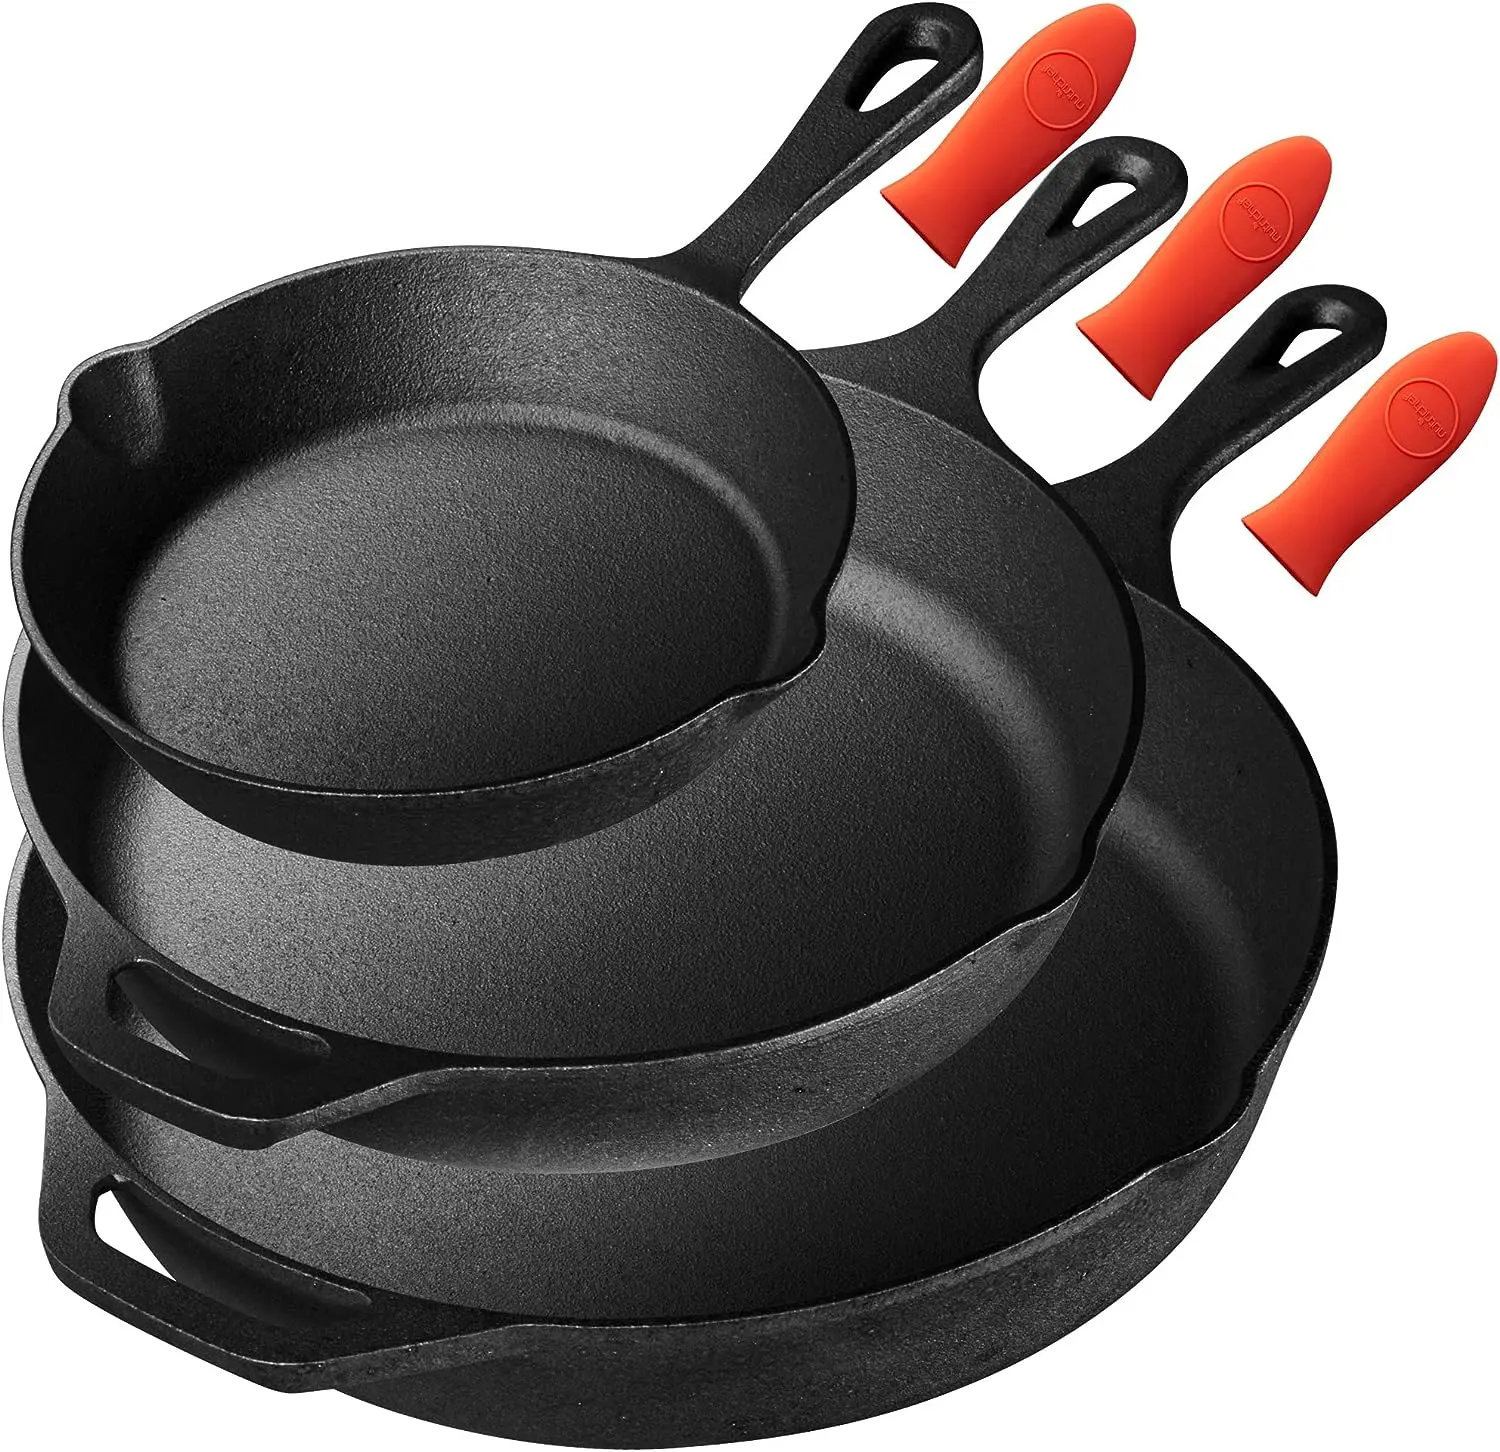 

Pieces Kitchen Frying Pre-Seasoned Cast Iron Skillet Pans Nonstick Cookware Set w/Drip Spout, Silicone Handle, for electric Stov